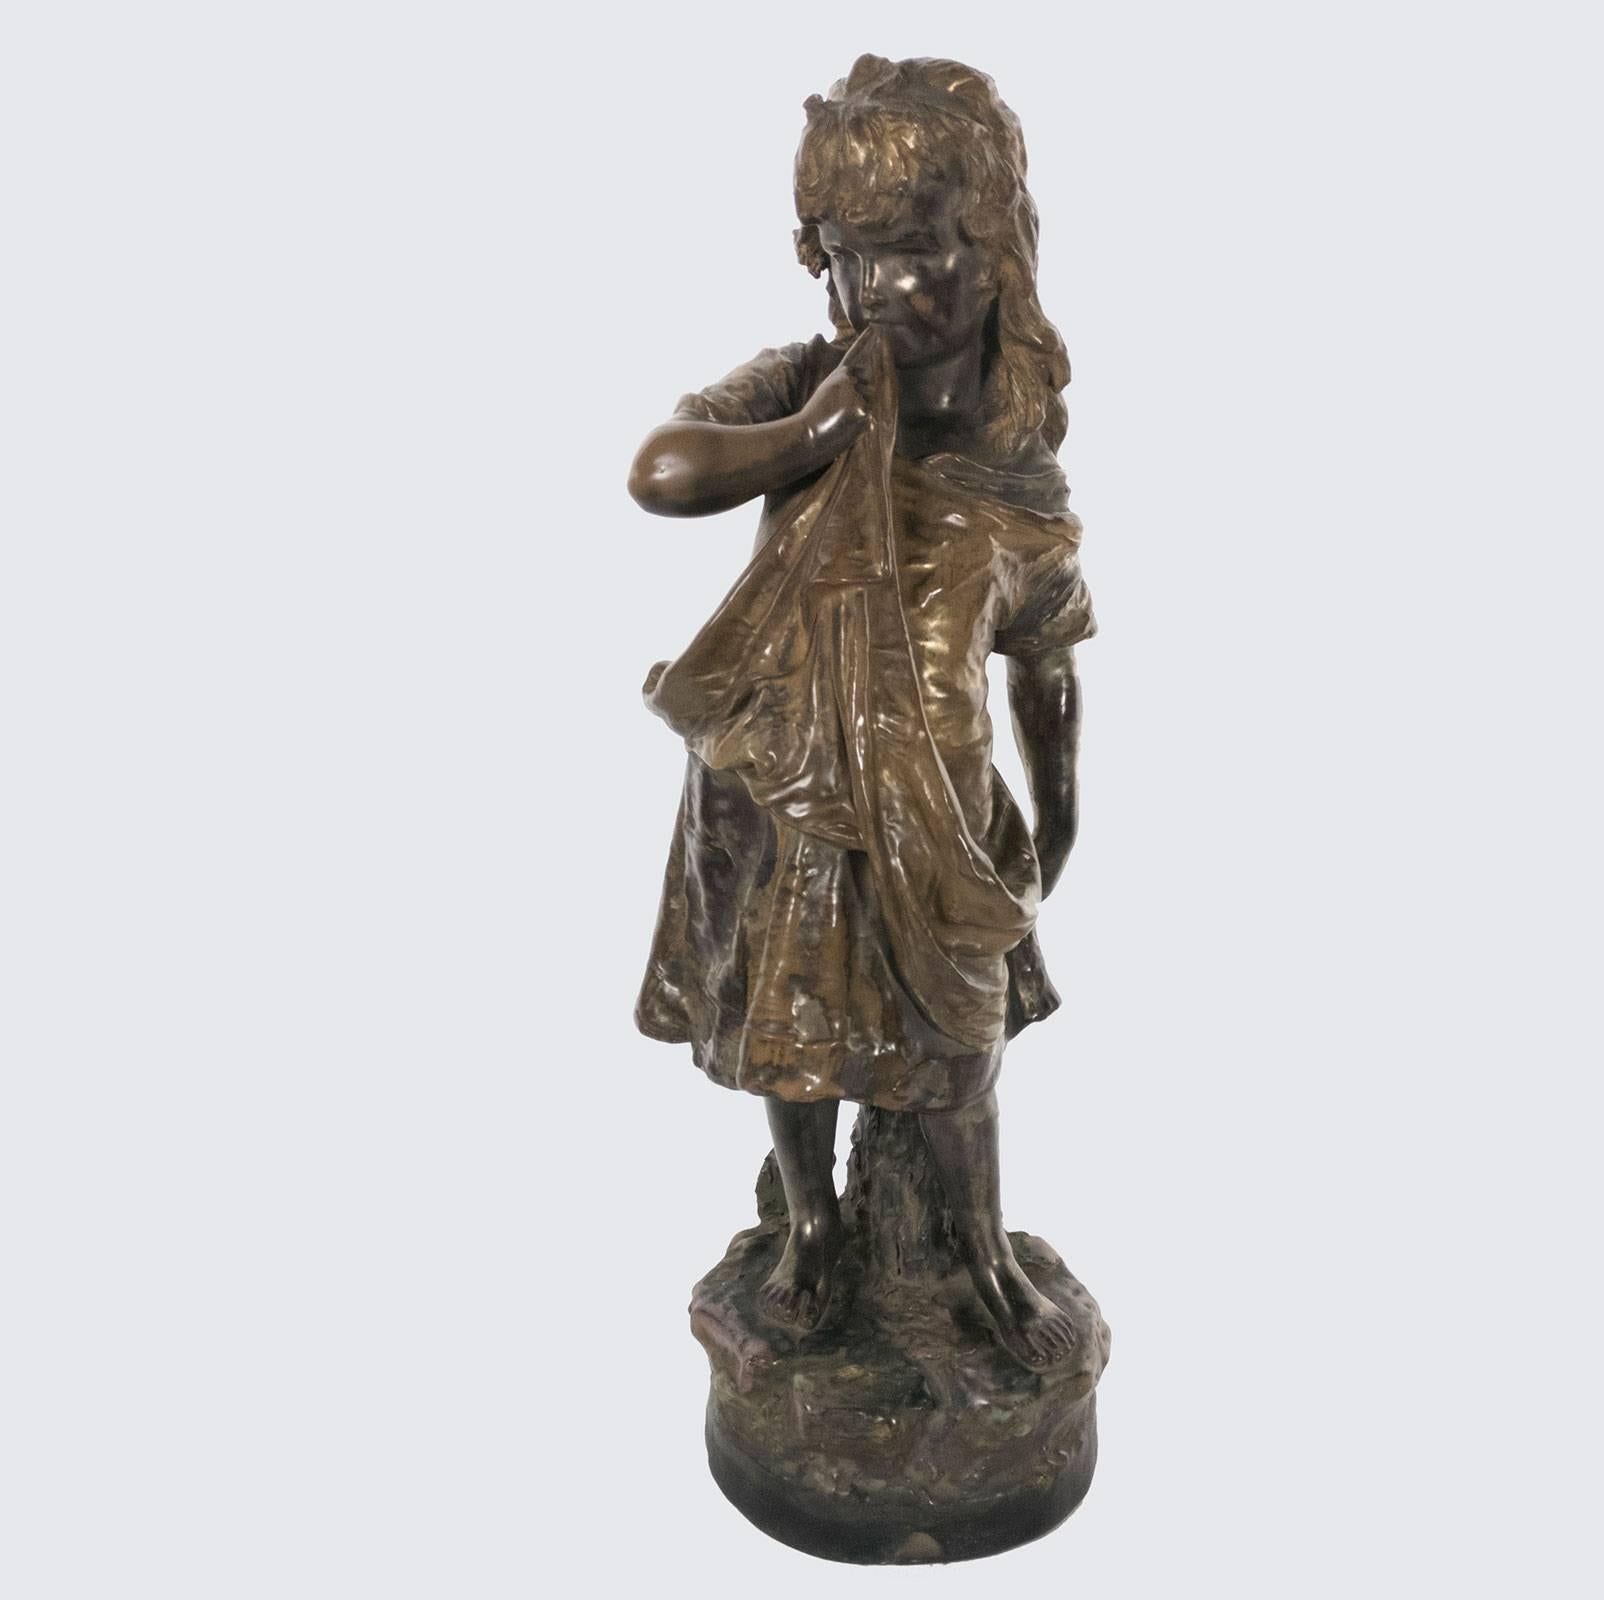 Winning art pottery figure of a young girl, by the Amphora Pottery works of Turn-Teplitz, Bohemia. Posed leaning against a tree trunk on a naturalistic base, she stands shyly sucking on her apron. Her innocent beauty shines through the gentle